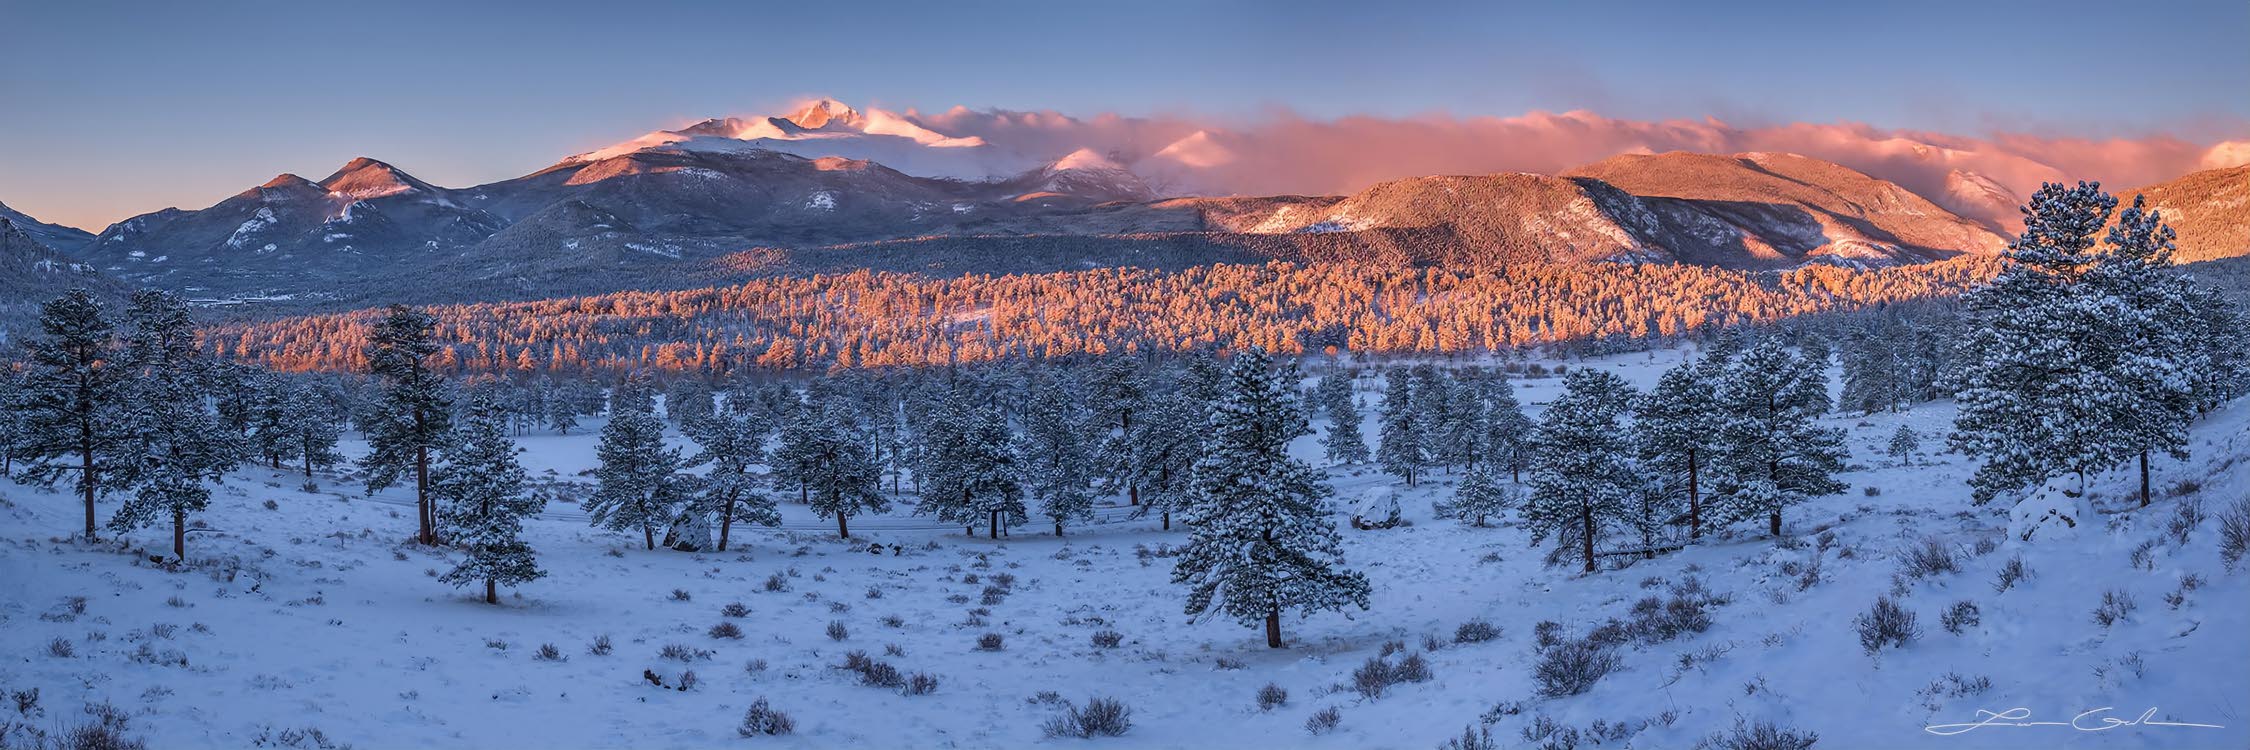 Winter sunrise with snow covered pine trees and Longs Peak in Rocky Mountain National Park